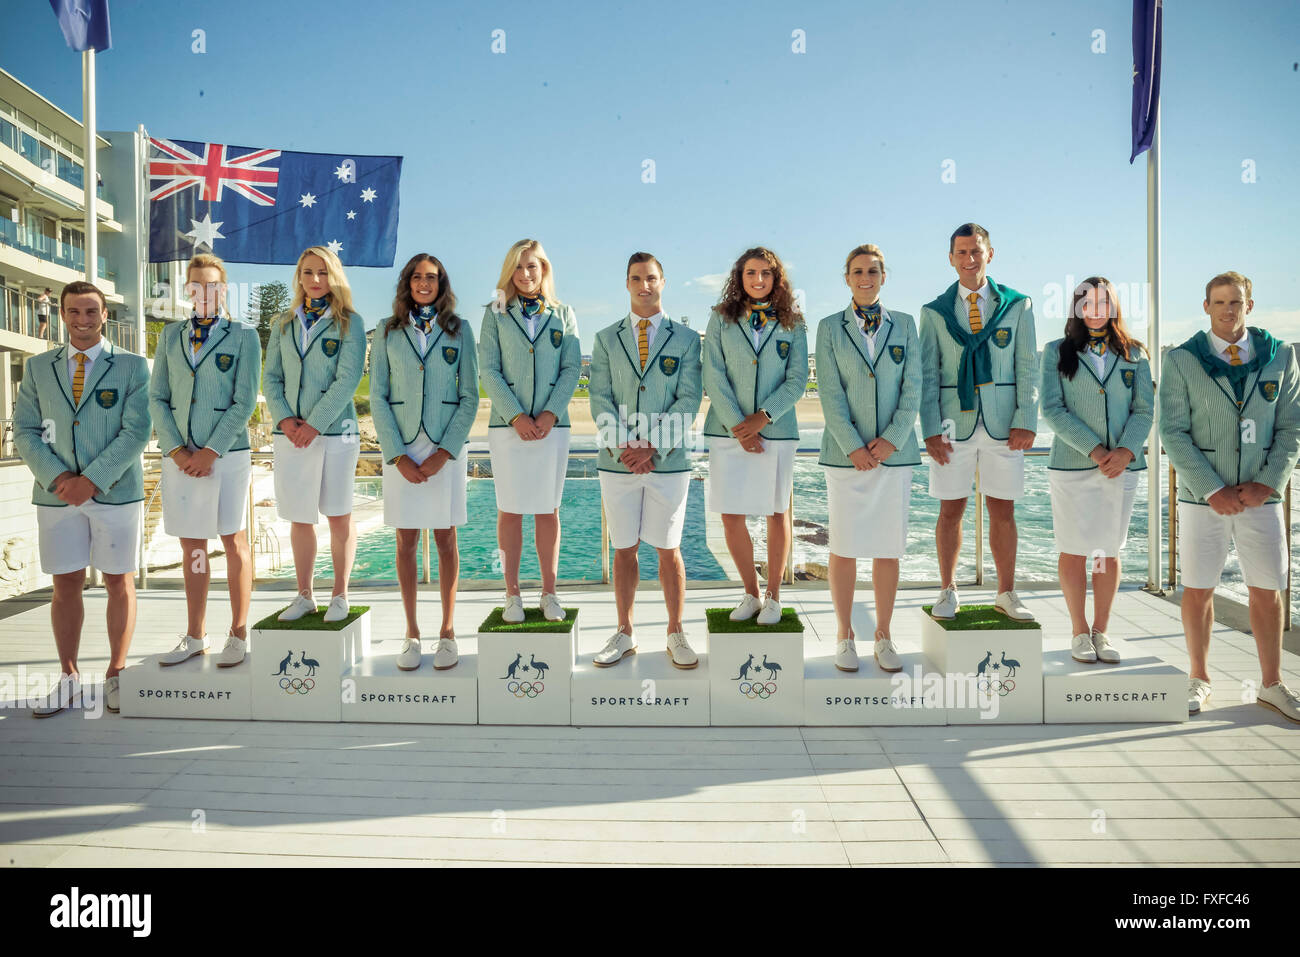 The Australian Olympic Committee (AOC) unveiled the Opening Ceremony Uniforms for the 2016 Australian Olympic Team on 30 March in Bondi, Sydney.  (L-R) Joshua Dunkley-Smith, Louise Bawden, Kaarle McCulloch, Taliqua Clancy, Annette Edmondson, Ed Jenkins, Jessica Fox, Penny Taylor, Jamie Dwyer, Charlotte Caslick and Ken Wallace Sydney, Australia. 30 March, 2016. © Hugh Peterswald/Alamy Live News Stock Photo